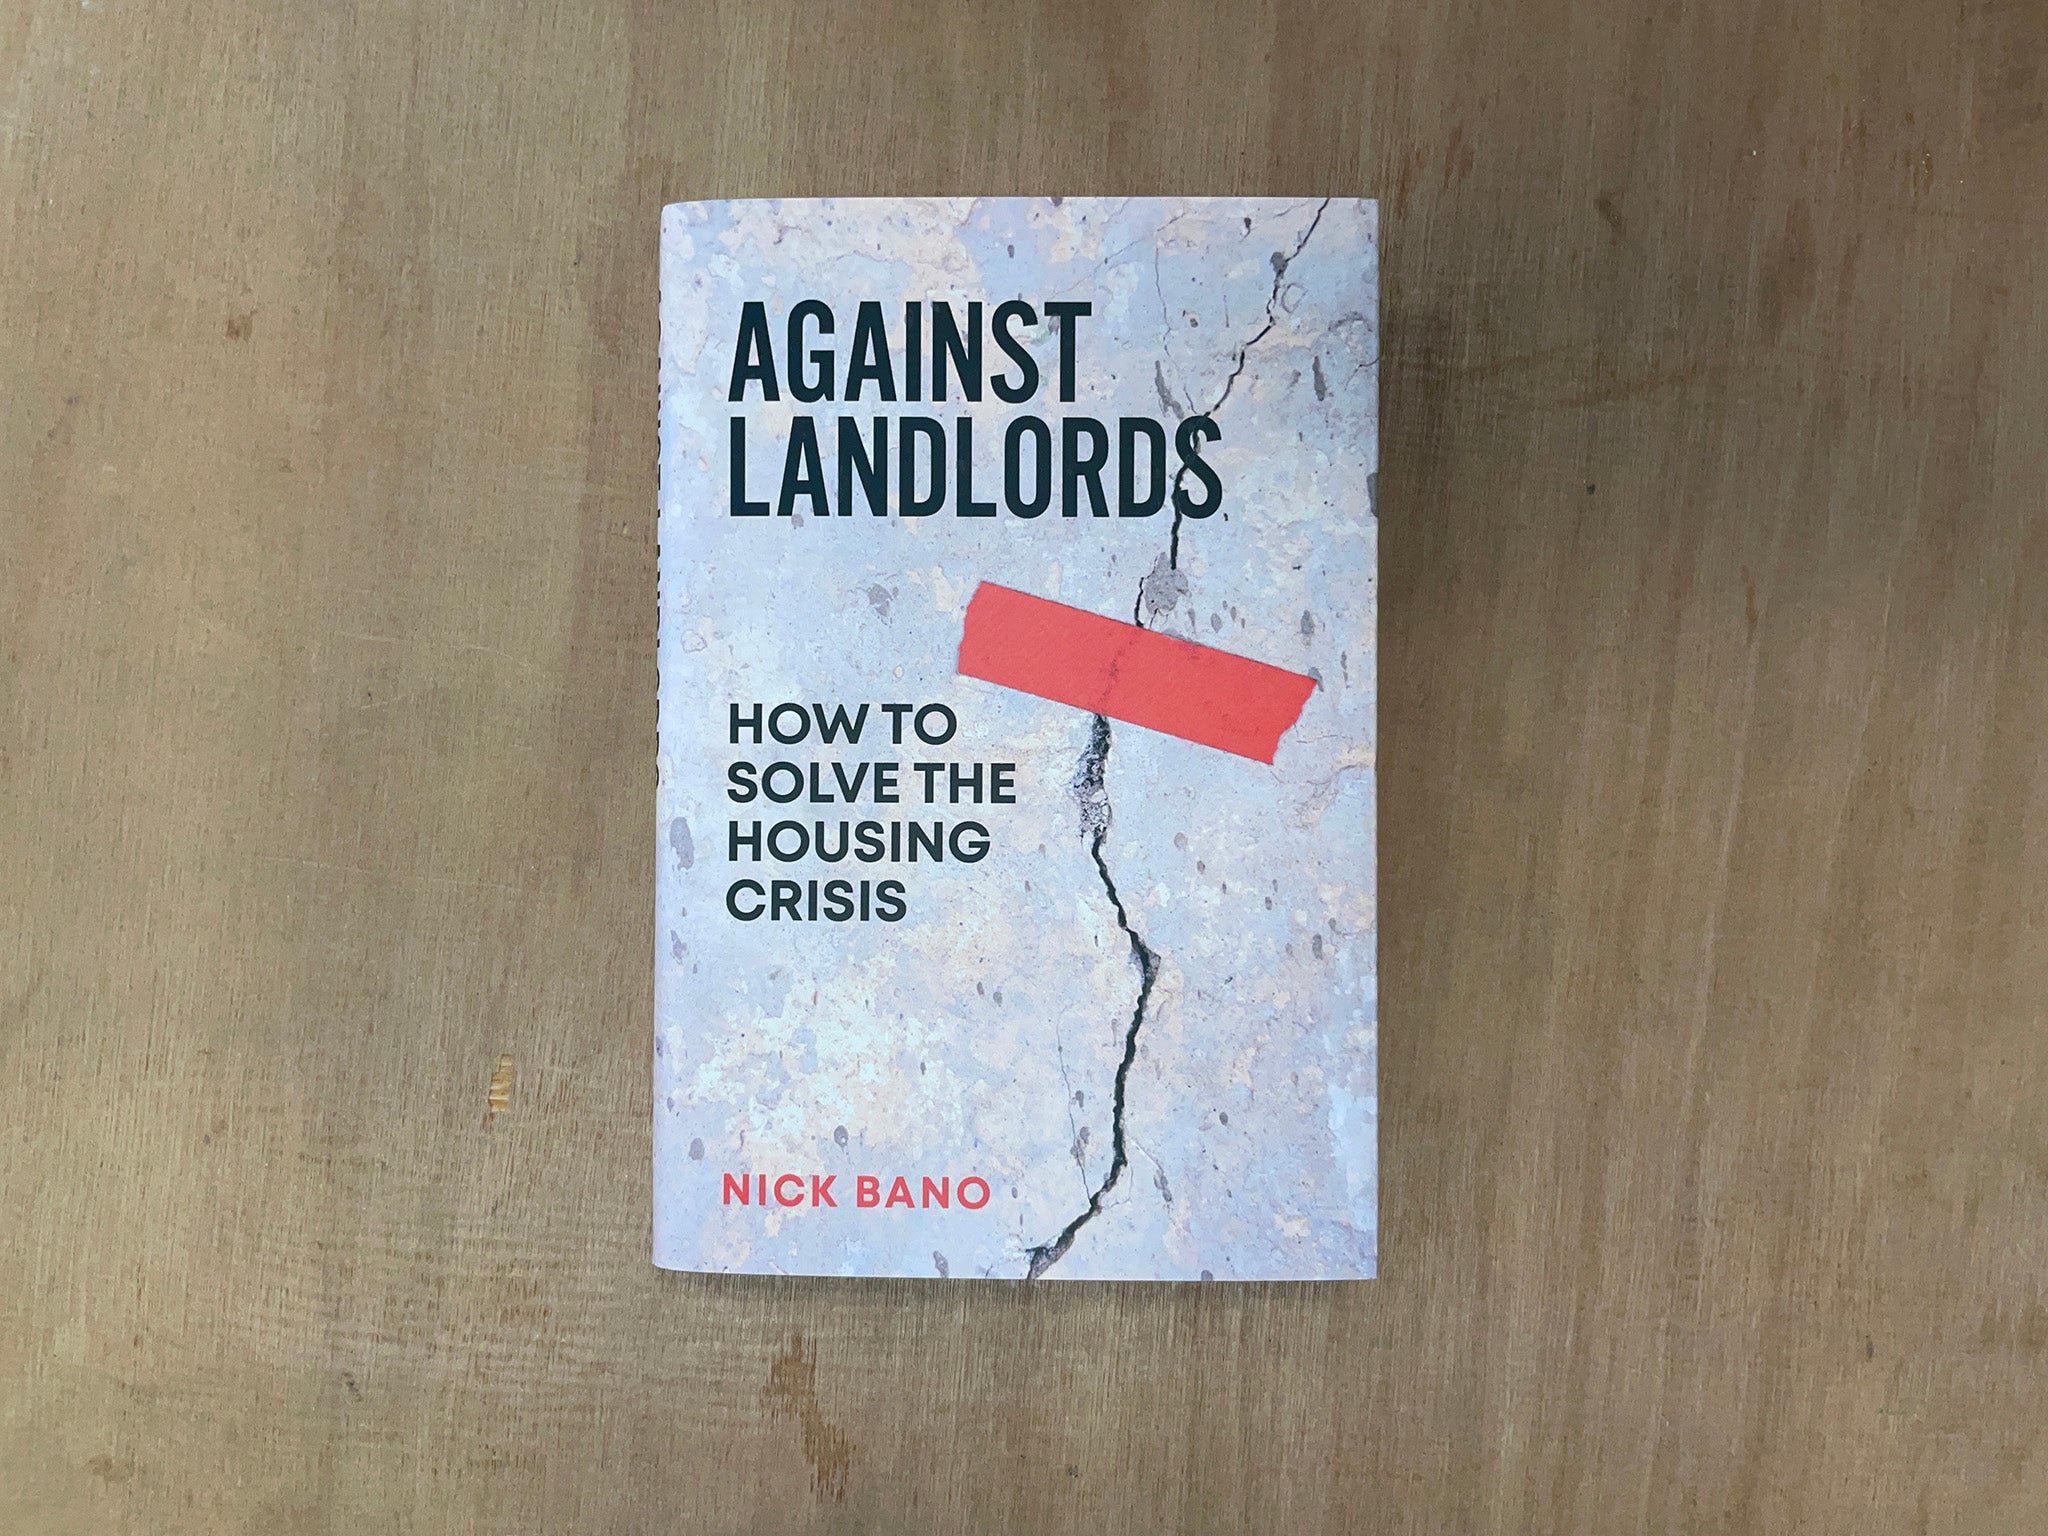 AGAINST LANDLORDS: HOW TO SOLVE THE HOUSING CRISIS by Nick Bano